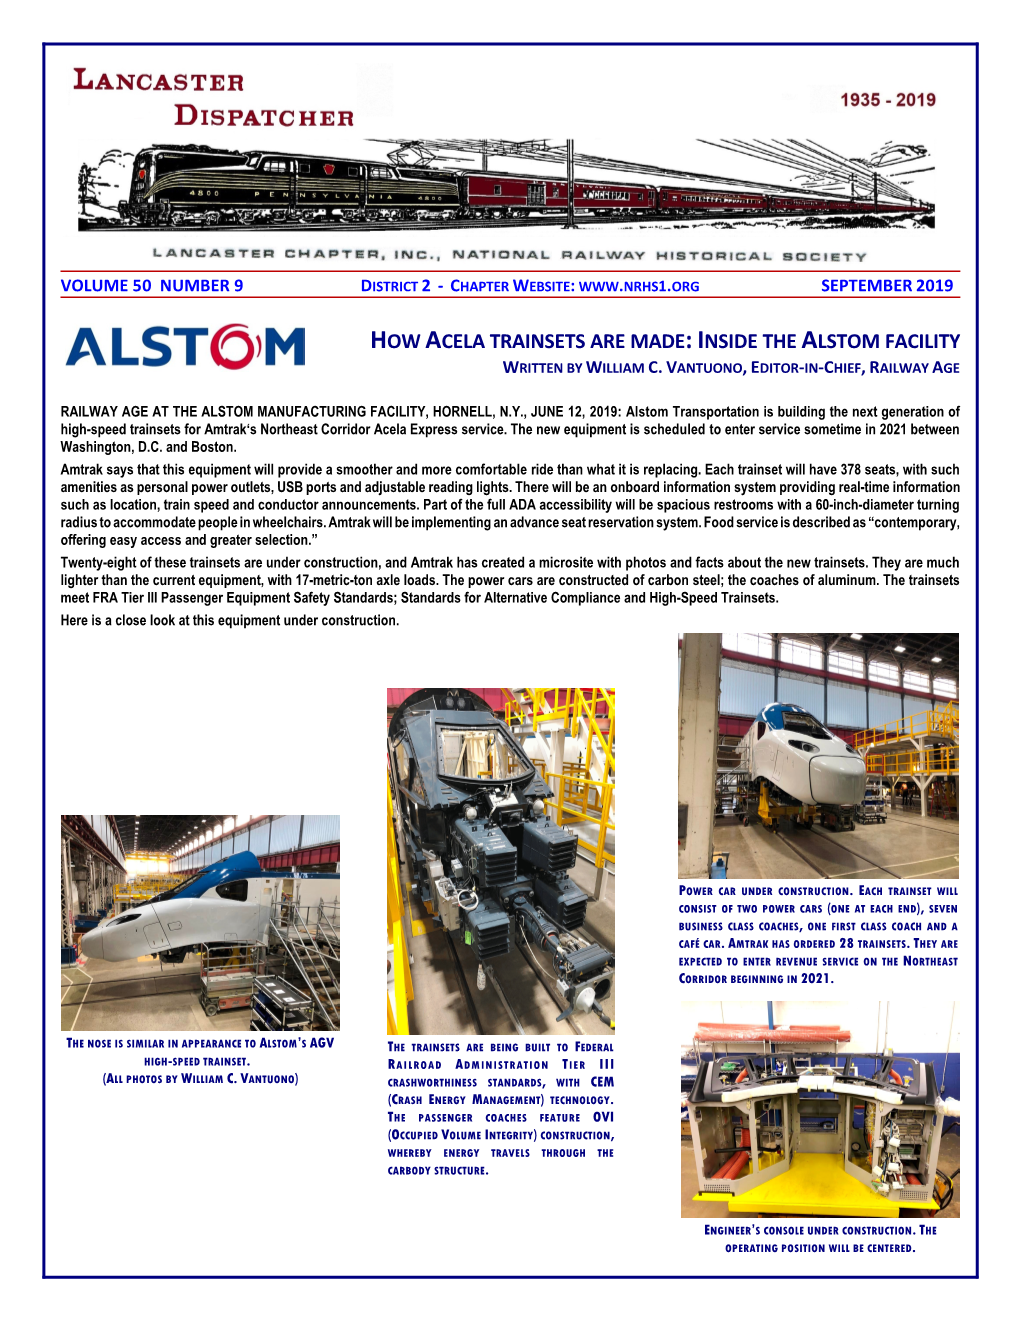 How Acela Trainsets Are Made: Inside the Alstom Facility Written by William C